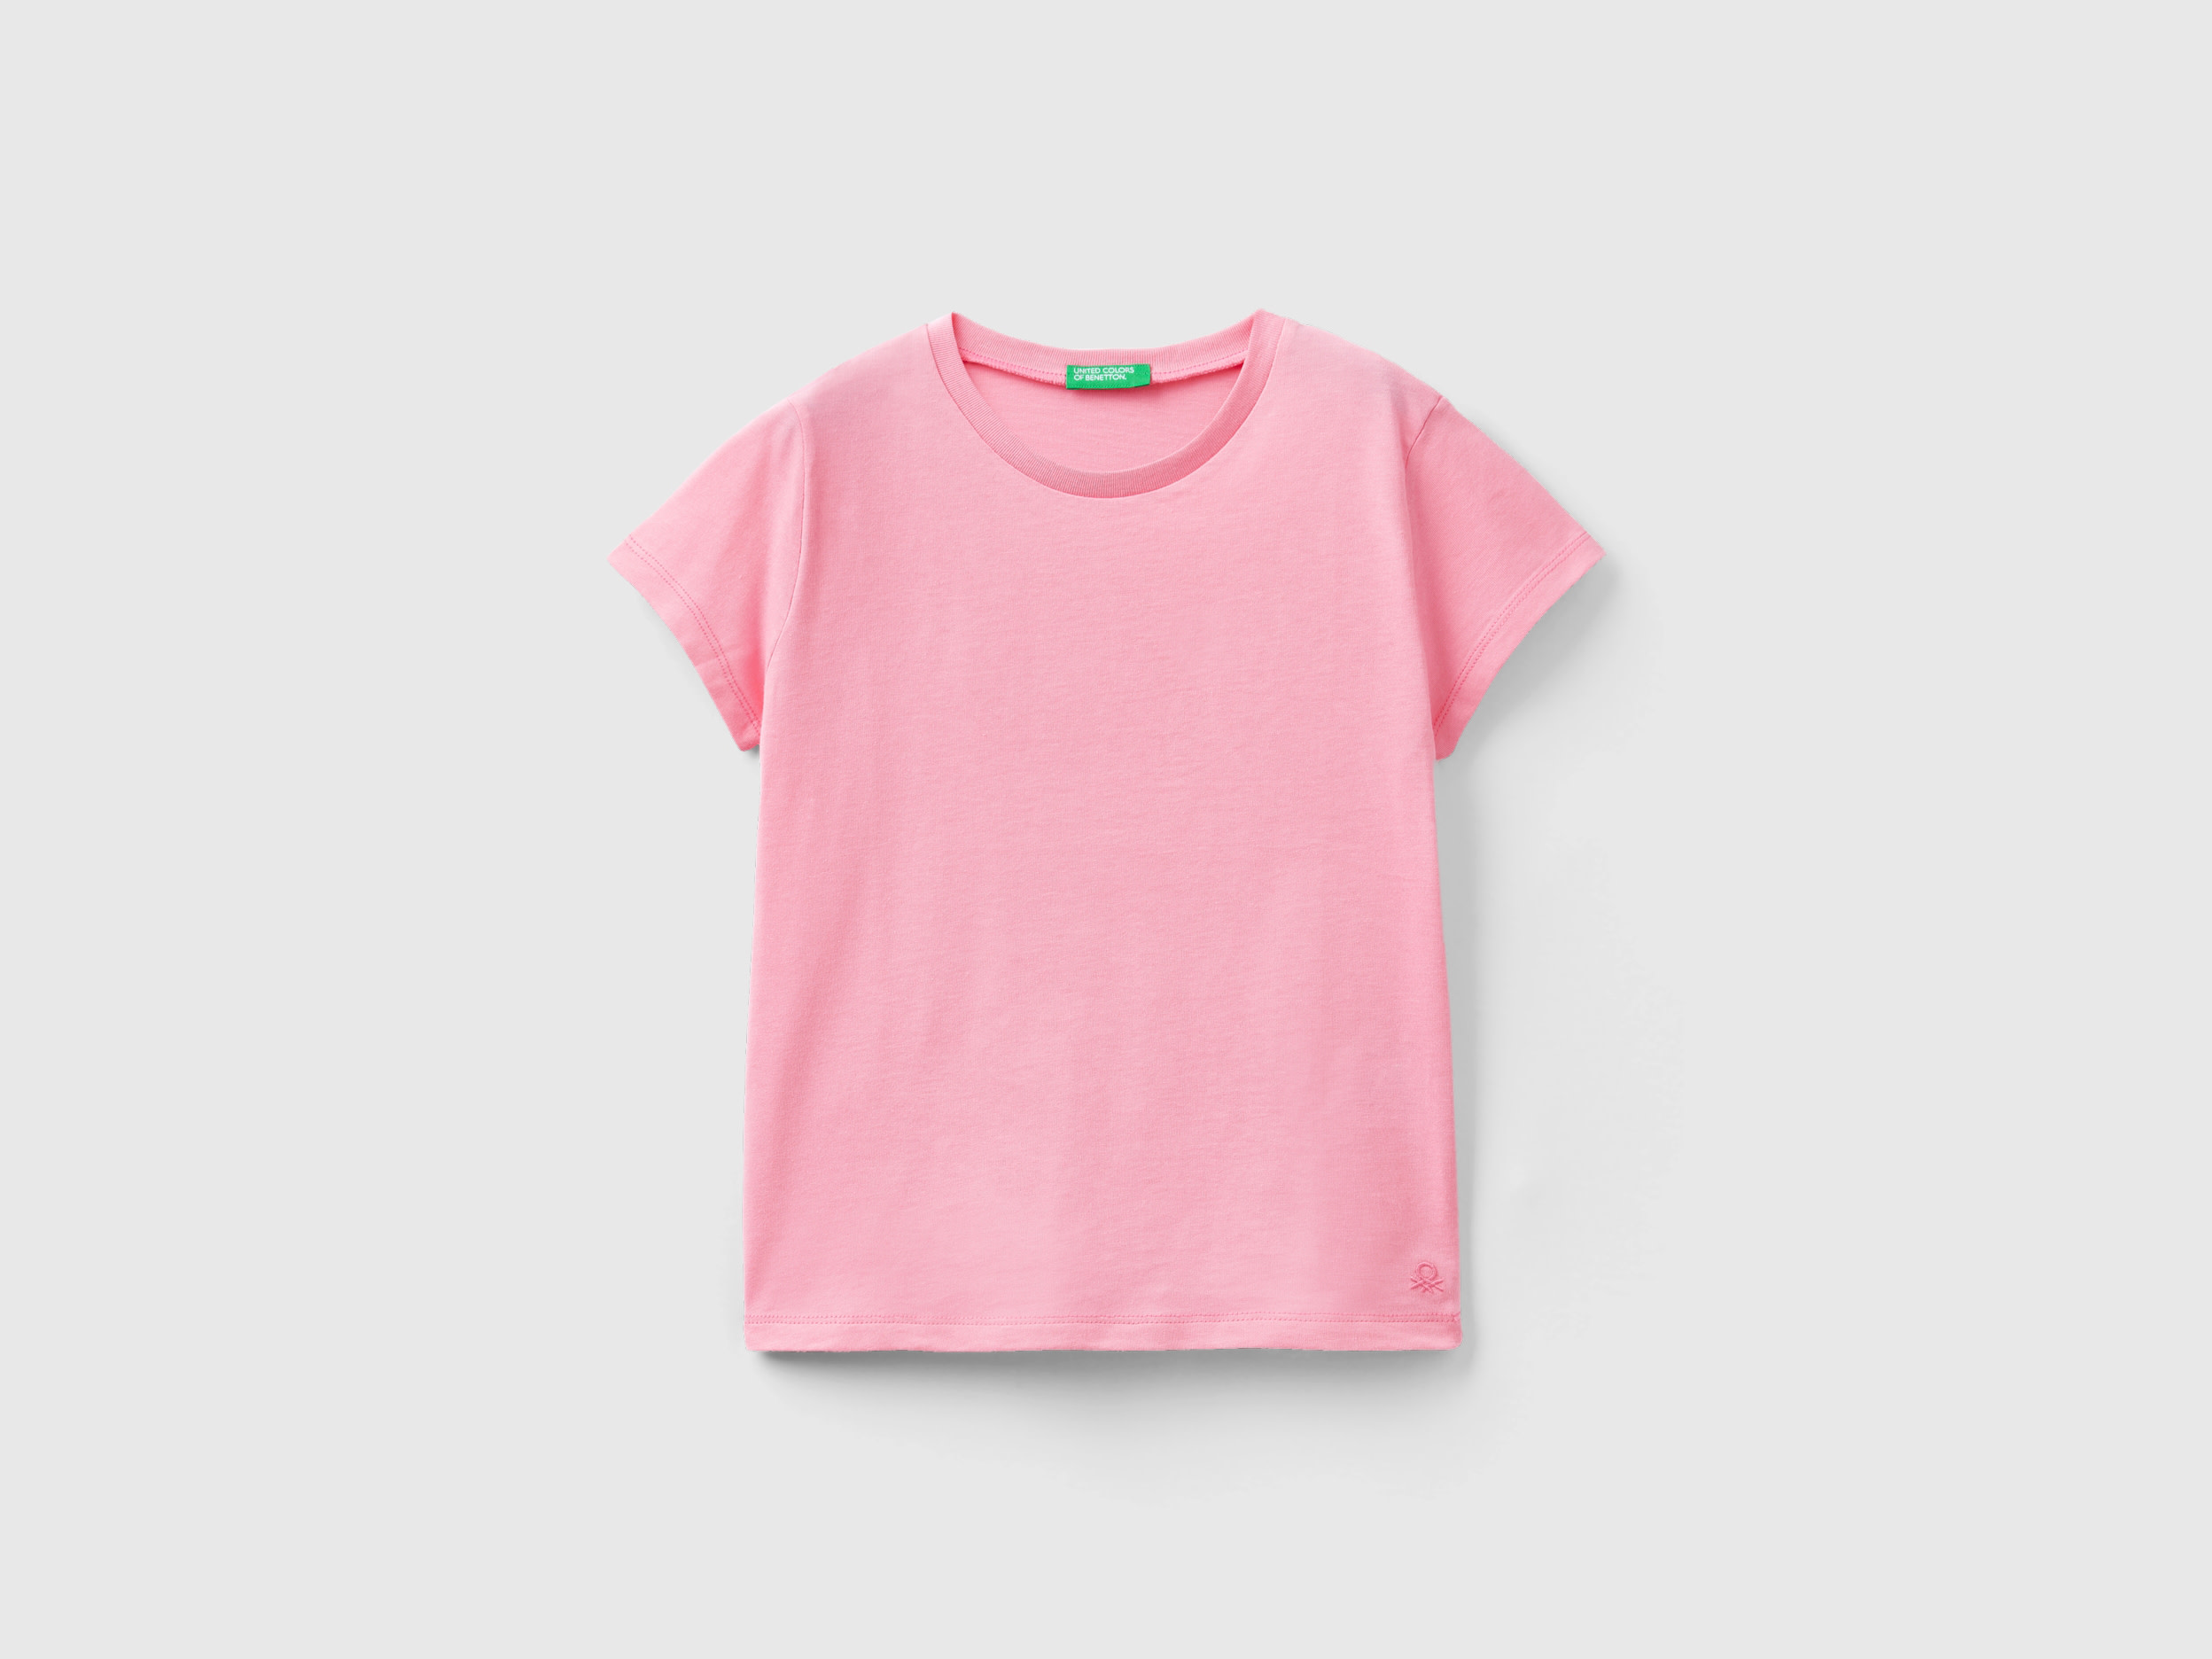 Image of Benetton, T-shirt In Pure Organic Cotton, size M, Pink, Kids